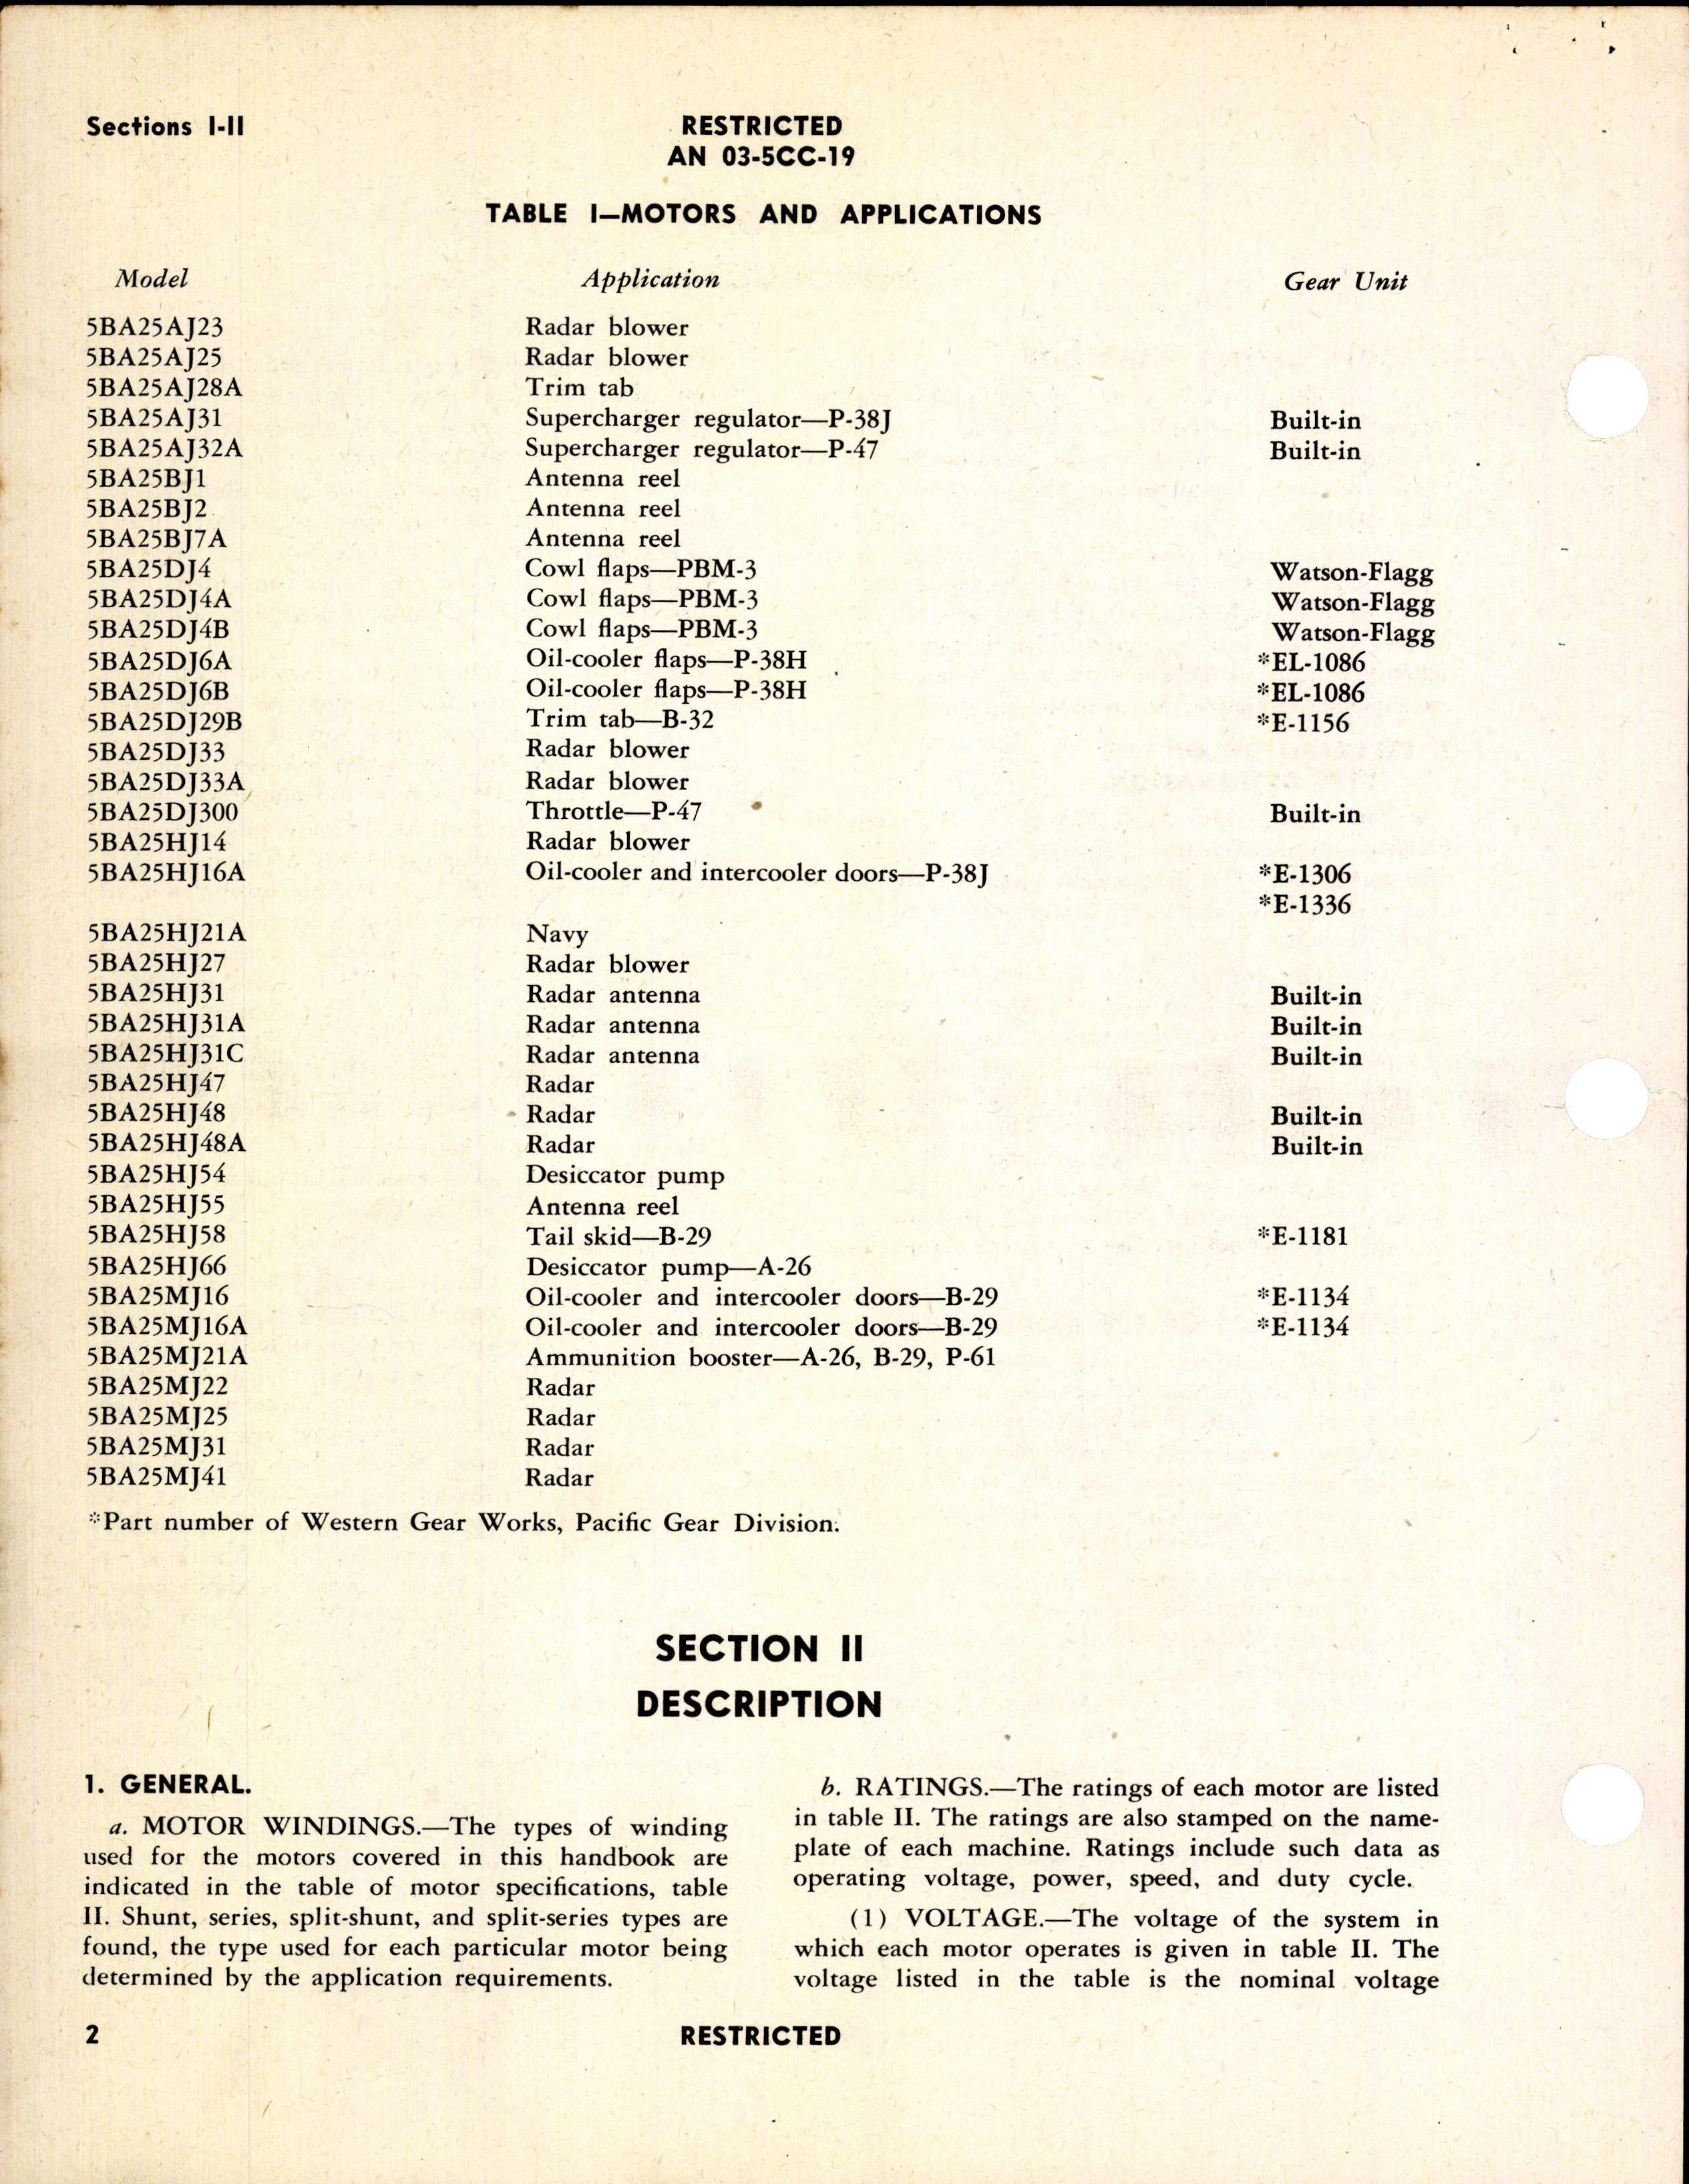 Sample page 4 from AirCorps Library document: Operation, Service, & Overhaul Inst w/ Parts Catalog for Aircraft Motors Model 5BA25 Series